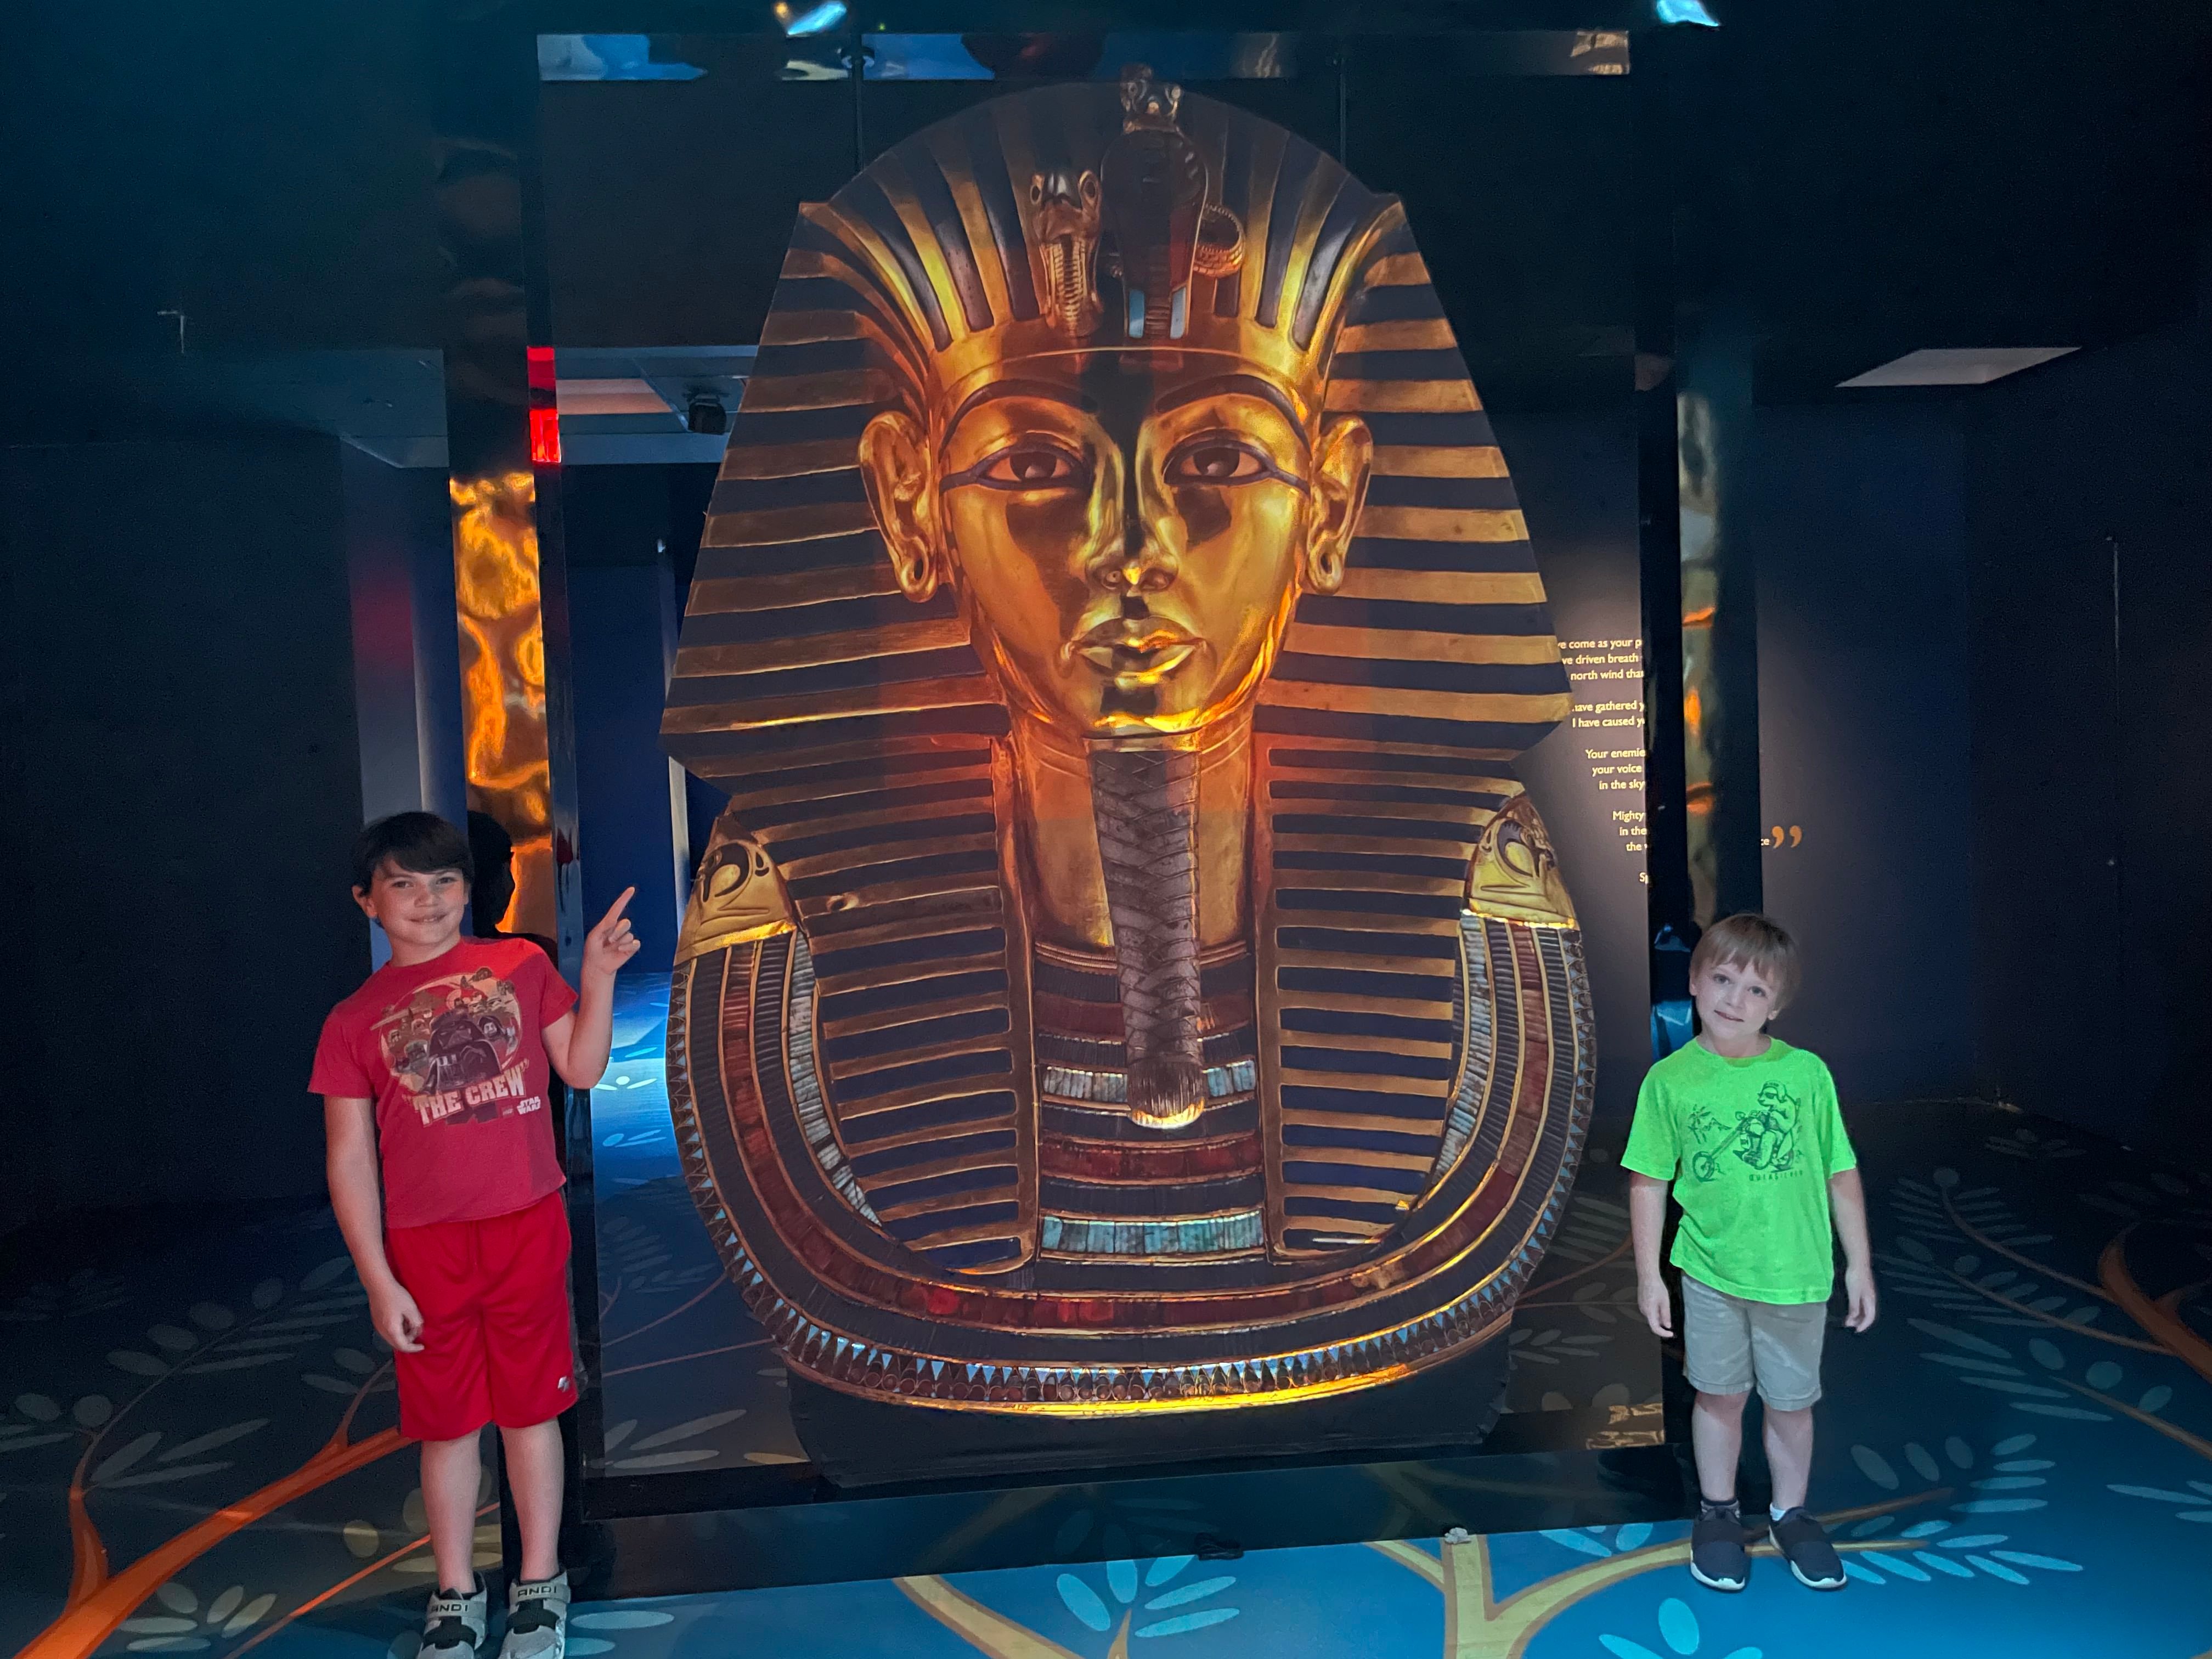 A 10 YearOld's Review of Beyond King Tut The Immersive Exhibit